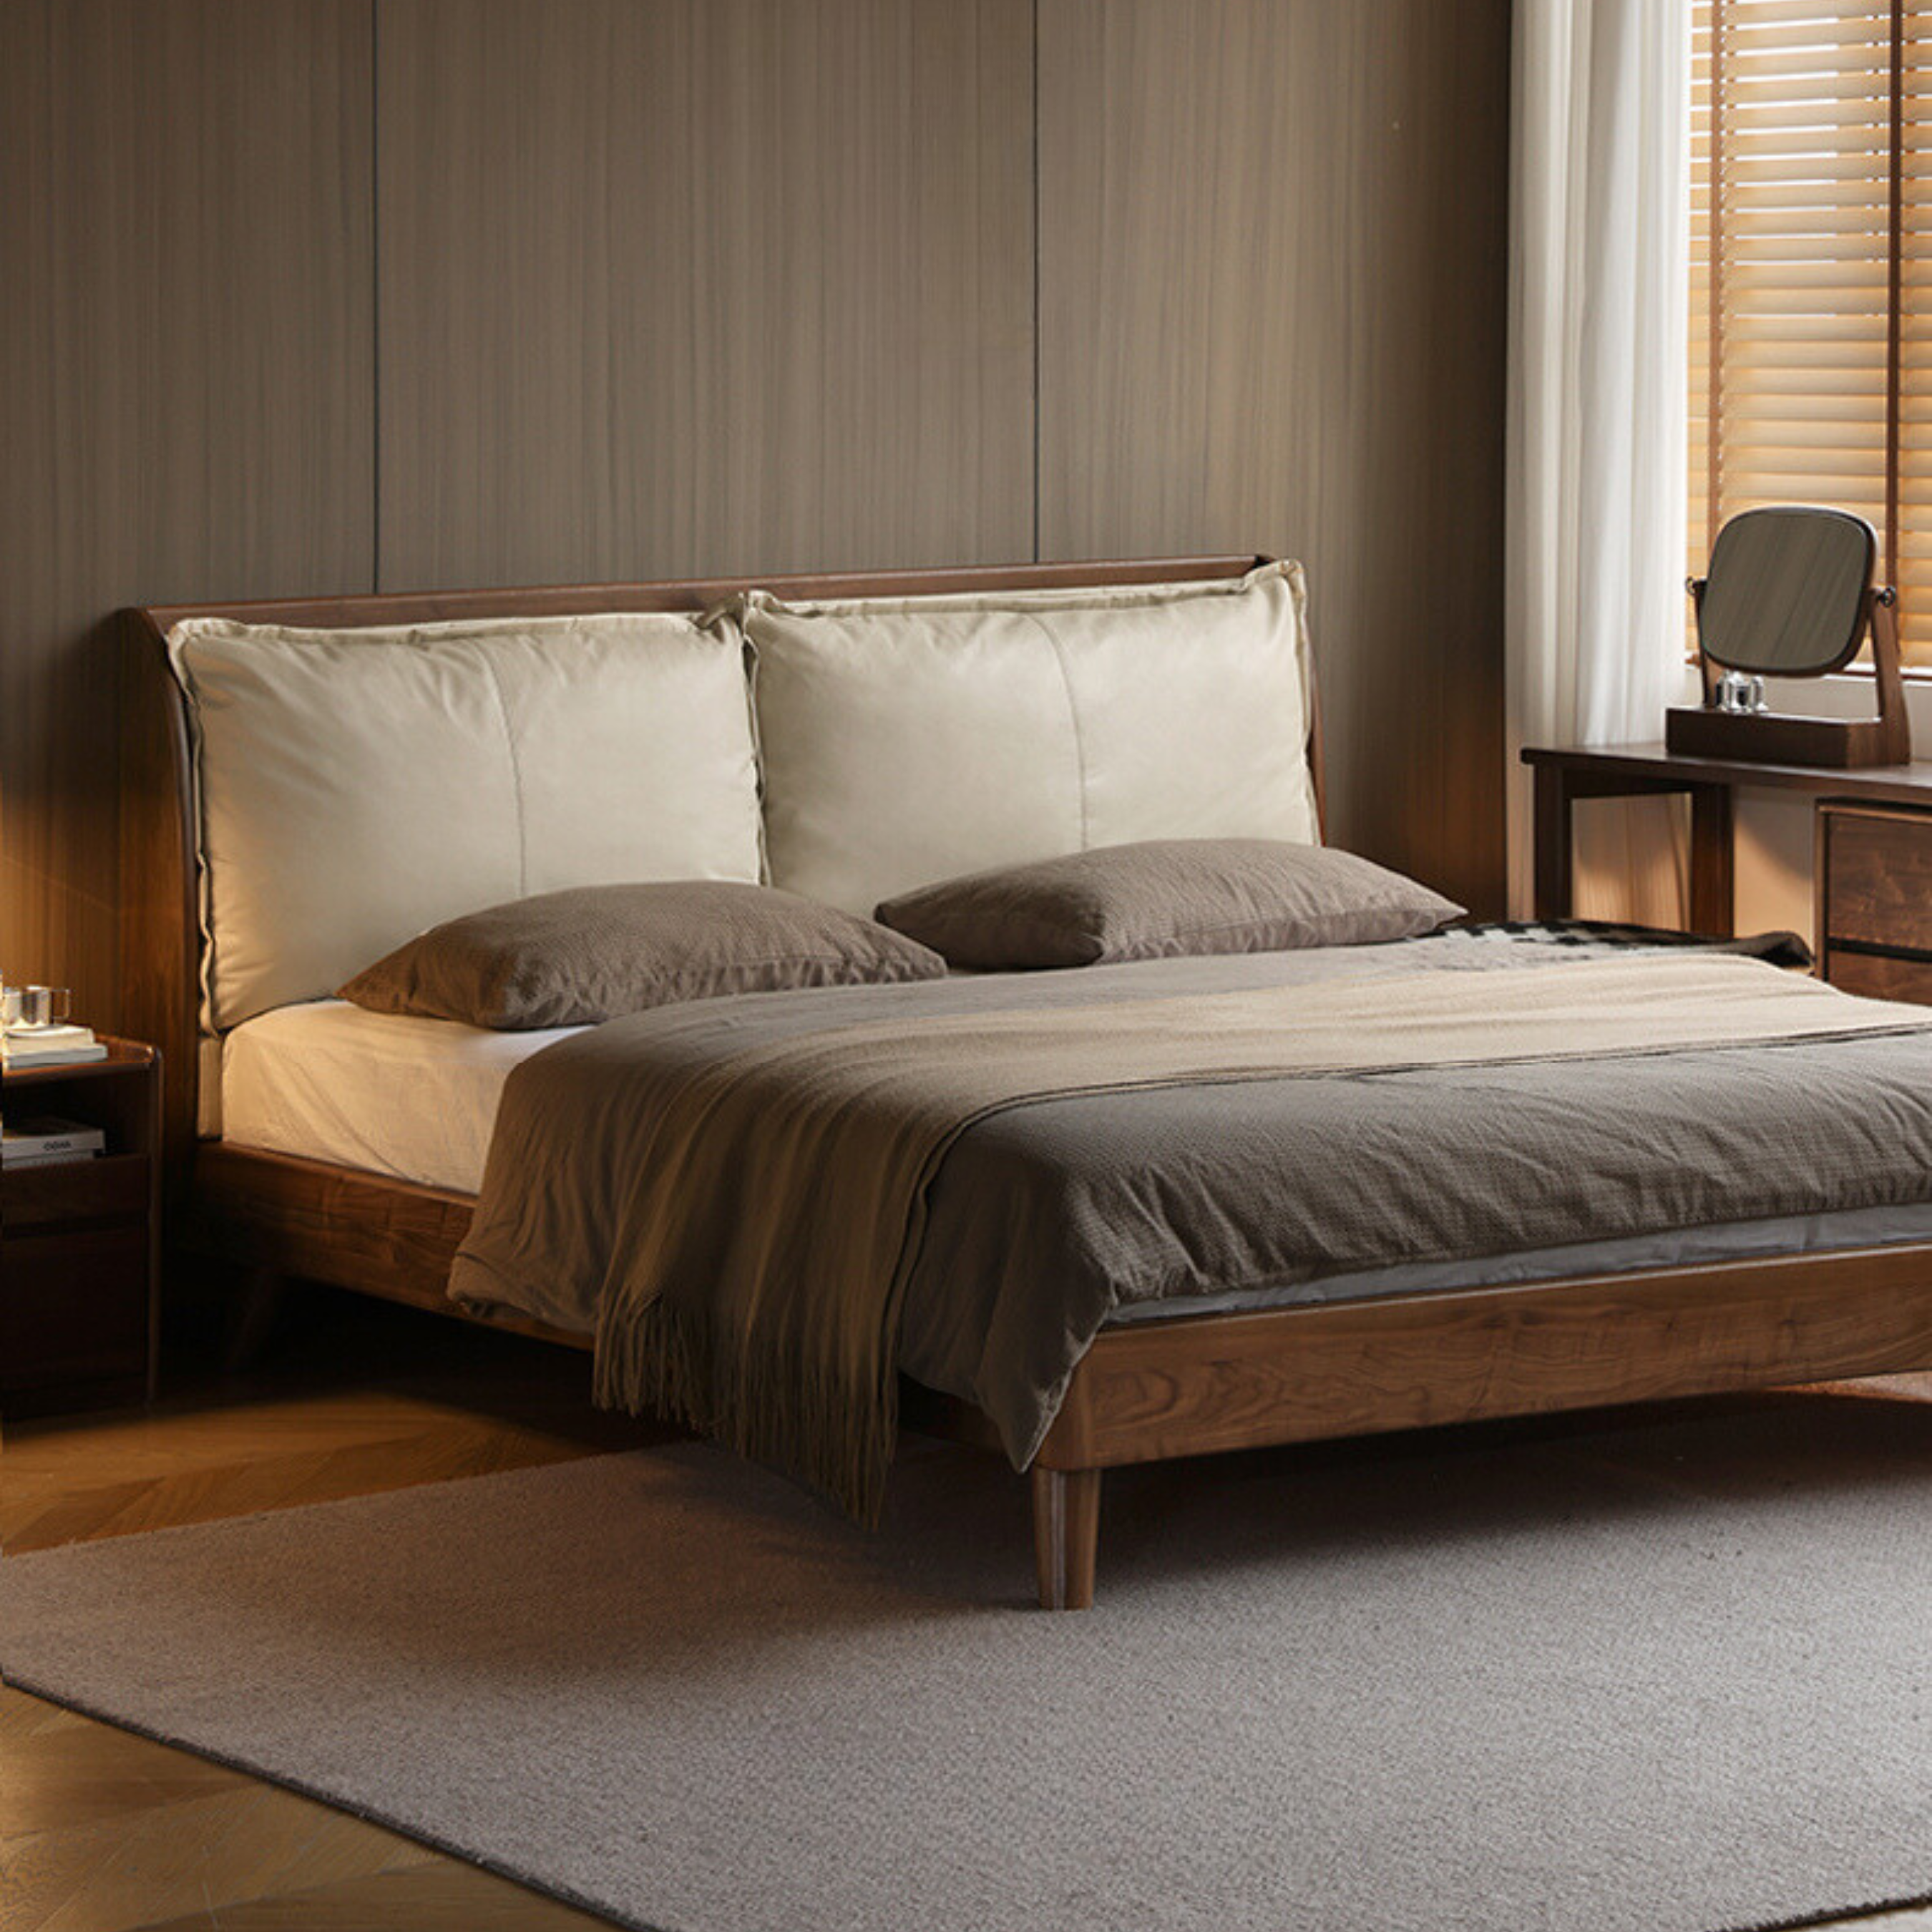 Black Walnut solid wood Bed Leather,Technology cloth "